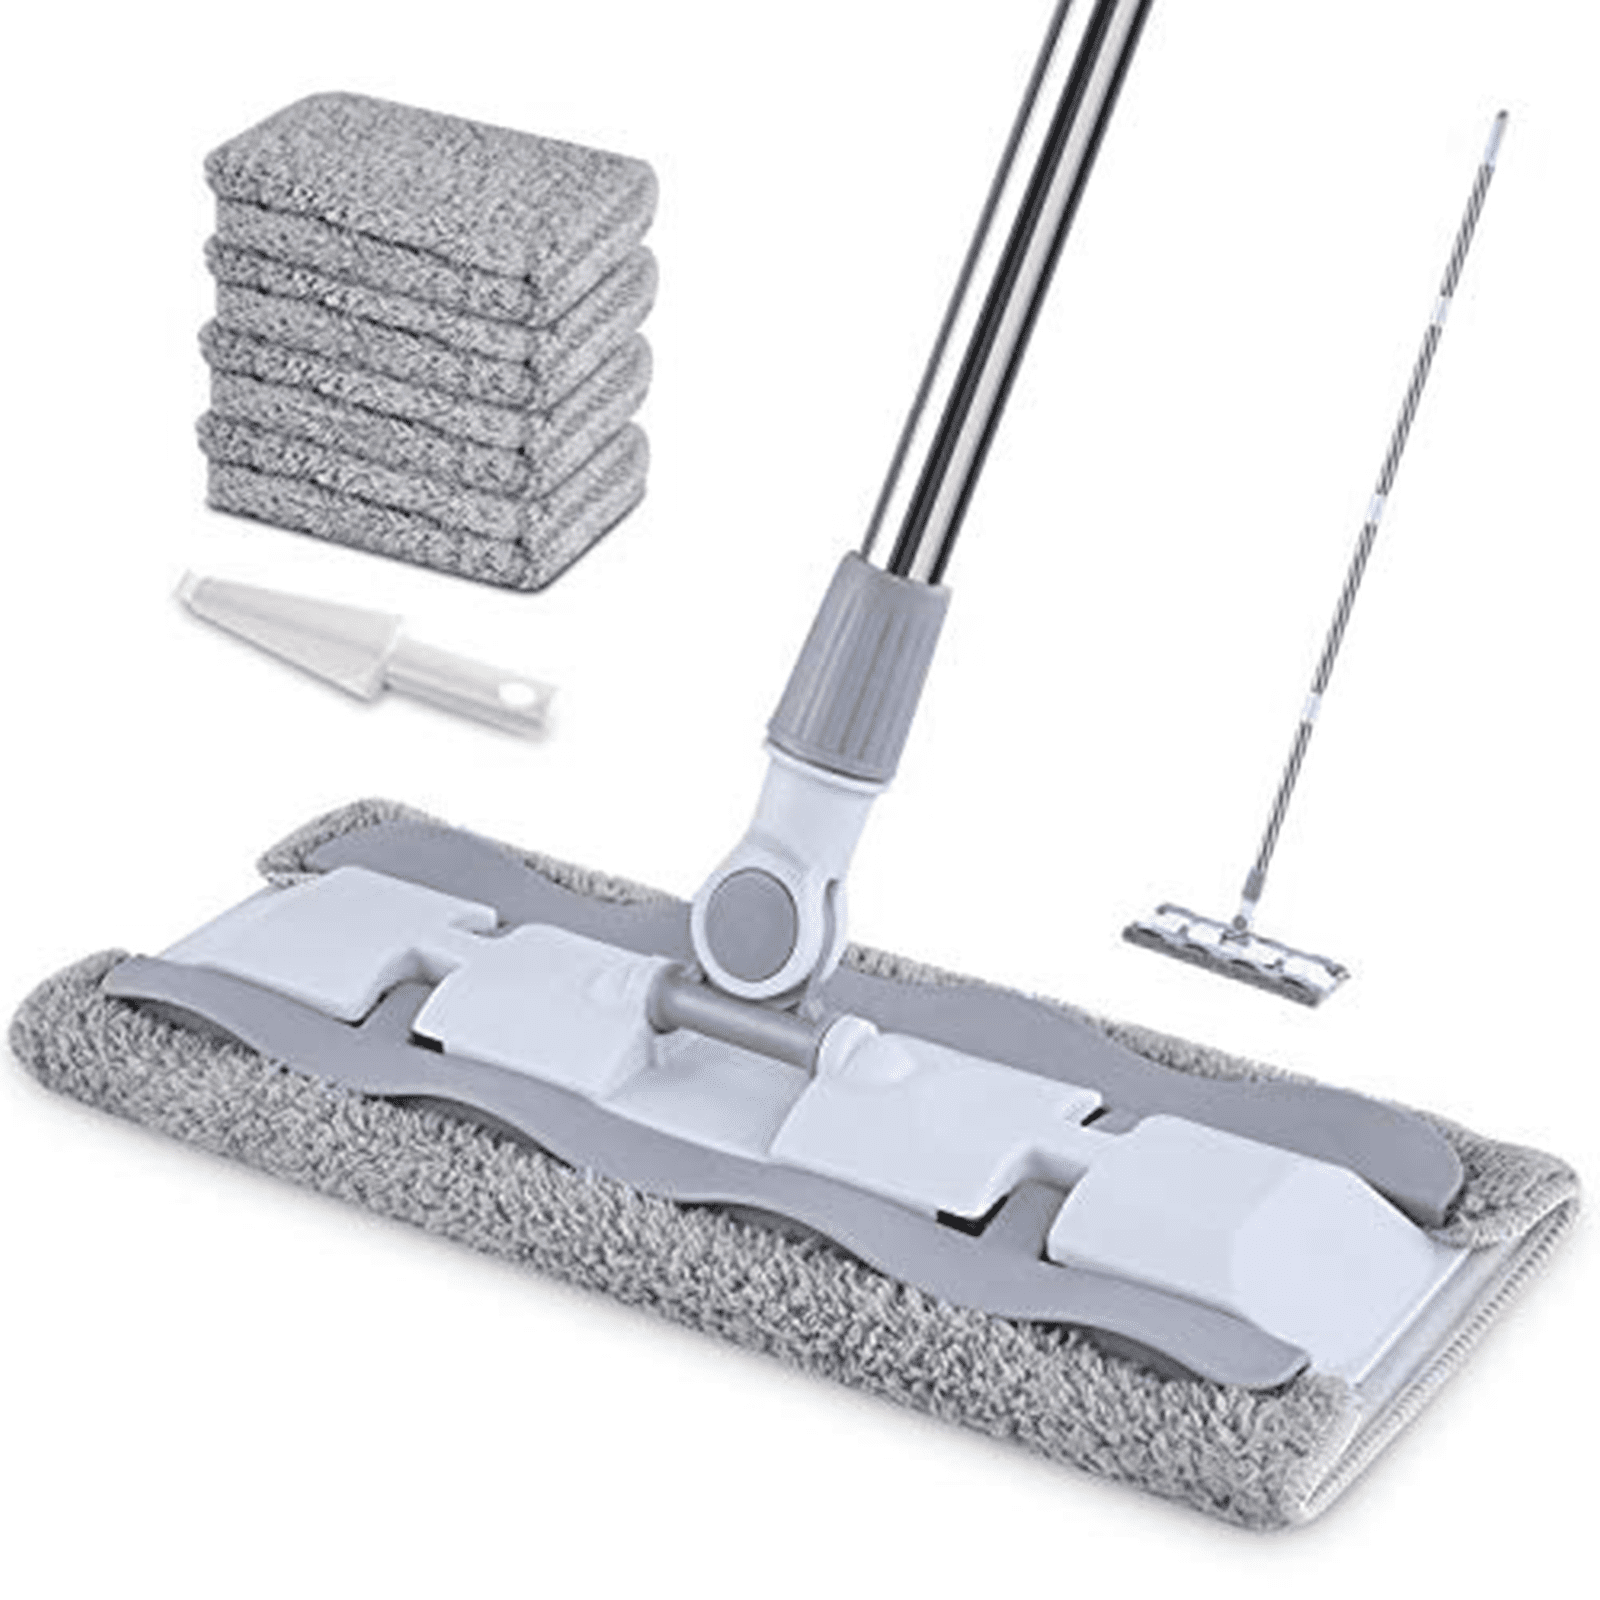 Grey Flat Floor Mop HOMTOYOU Mirofibre Dust Mop for Laminate Tile Hardwood Floor with 4 Mop Pads and 1 Dirt Removal Scrubbe 